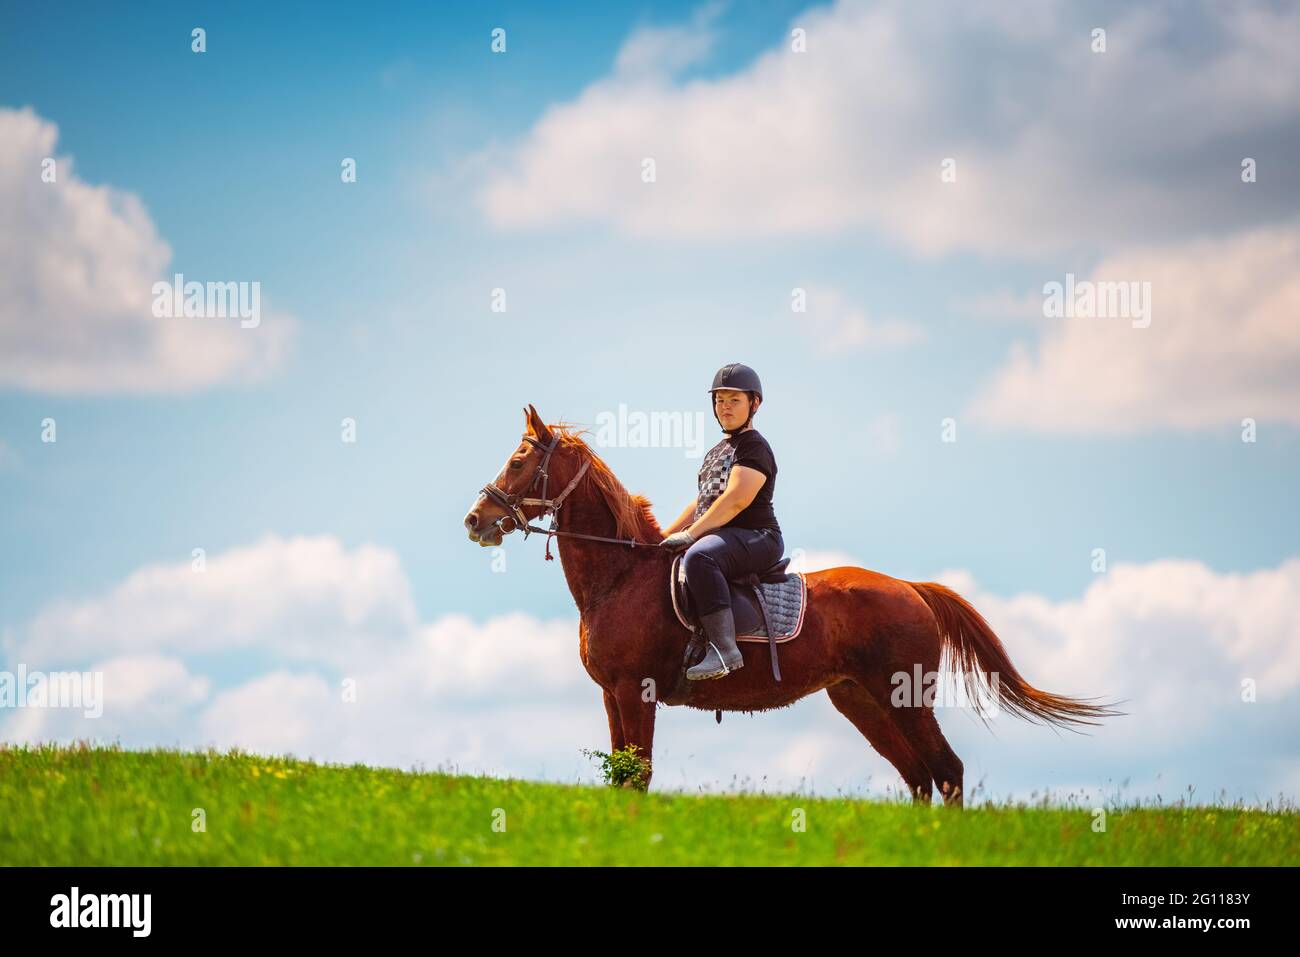 Young Boy riding a horse in the field Stock Photo